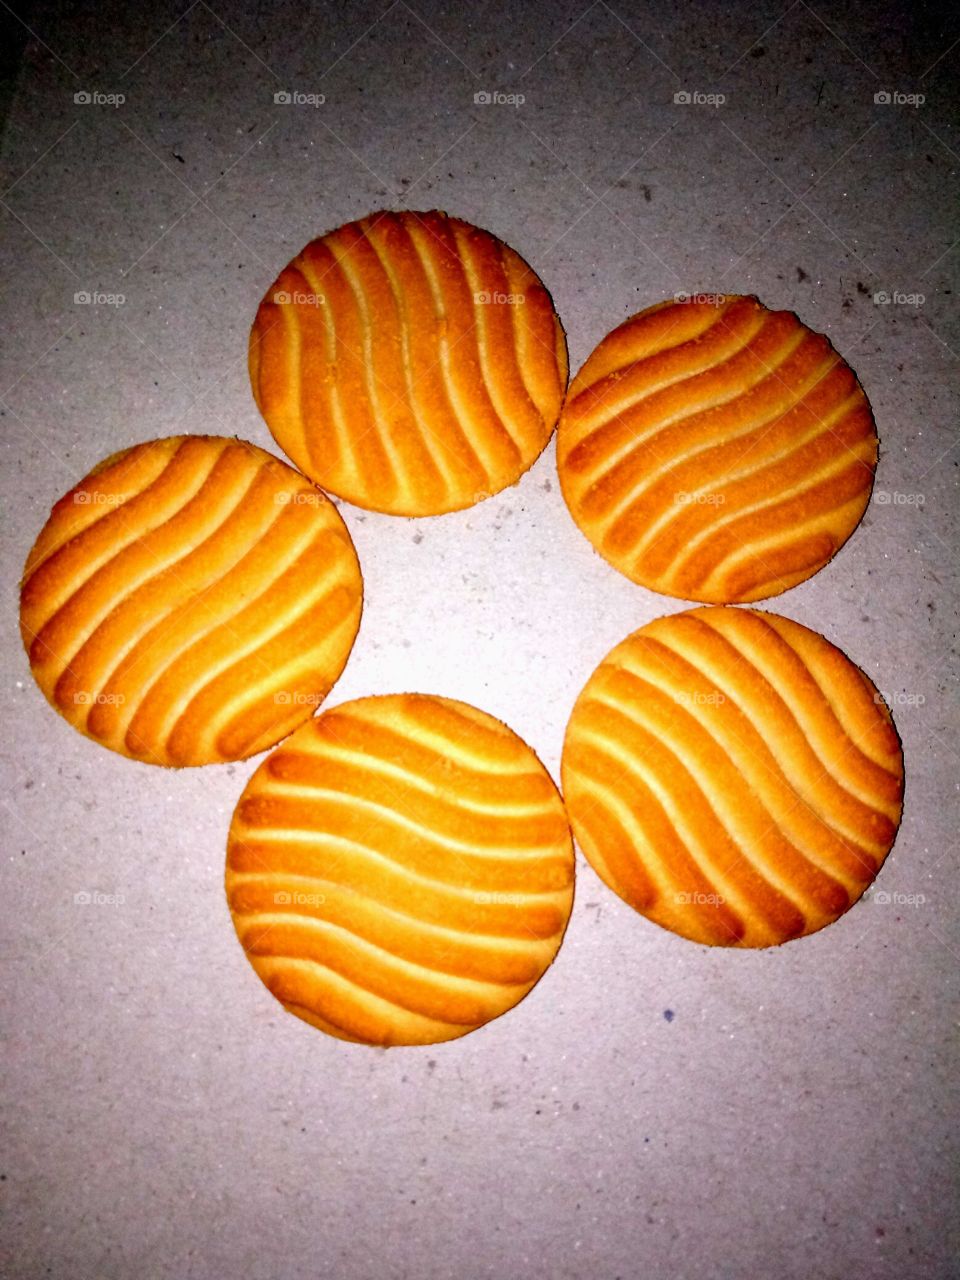 biscuits shape